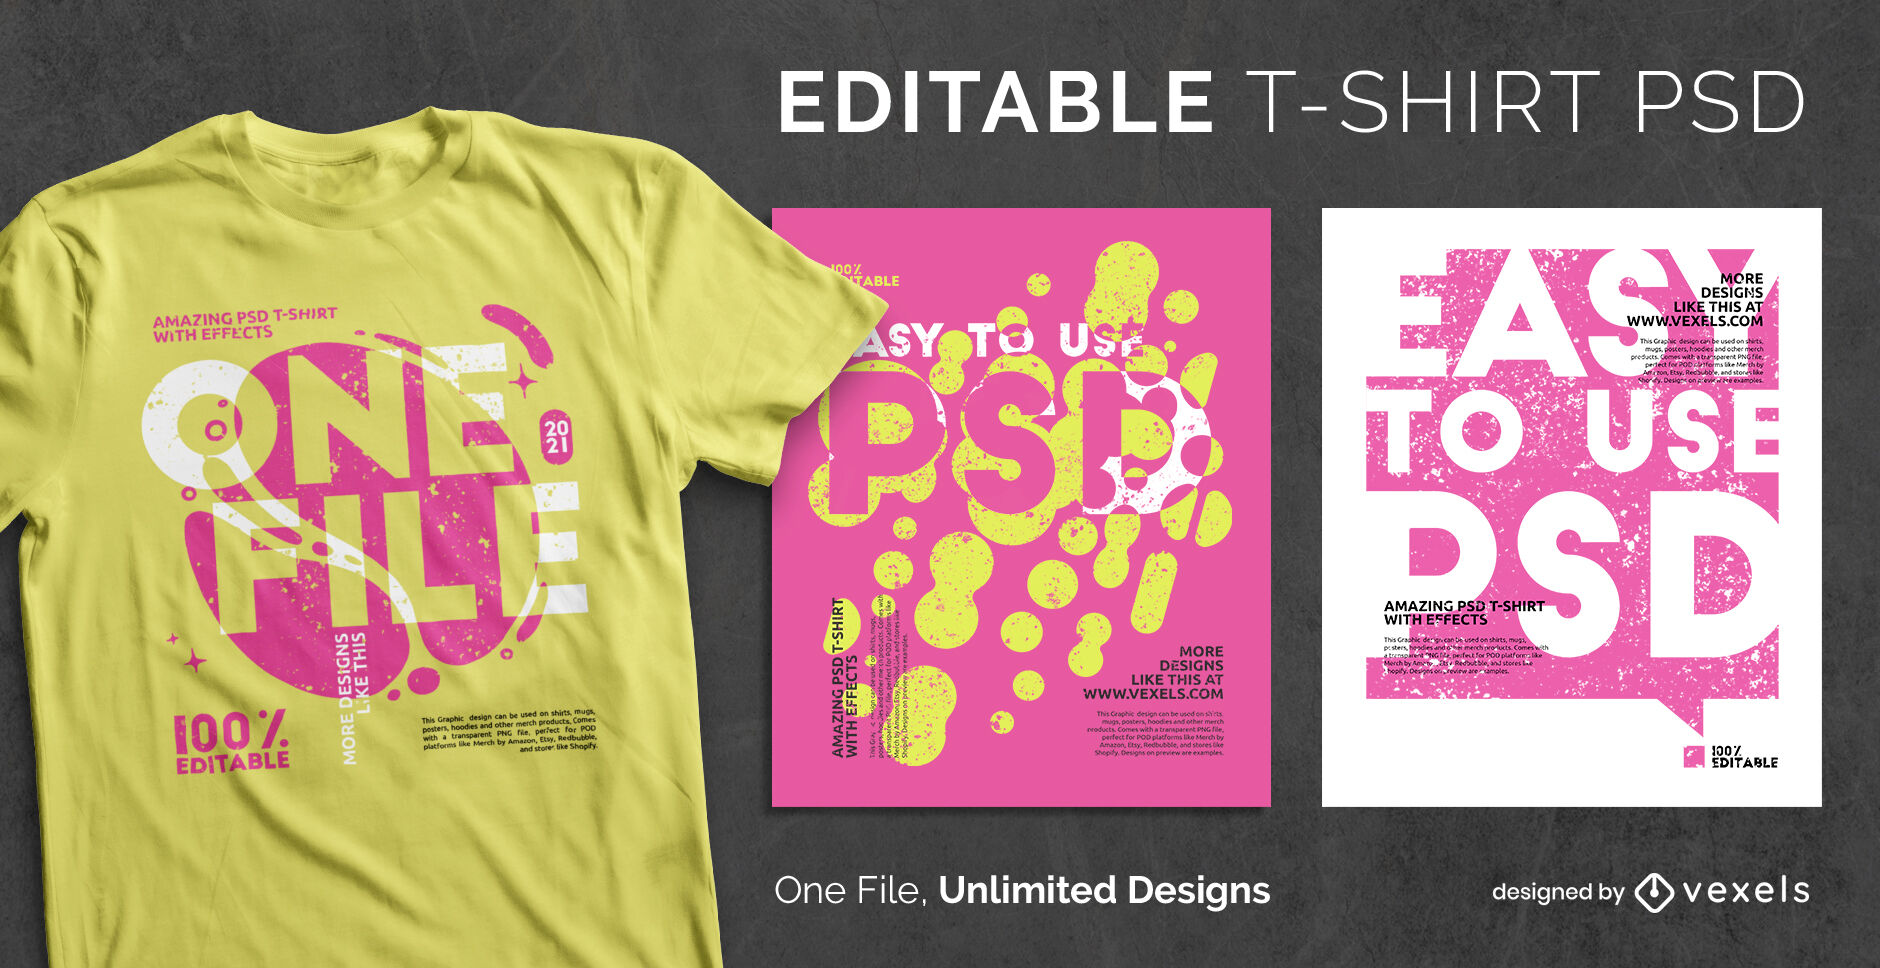 Text in contrast psd scalable t-shirt template